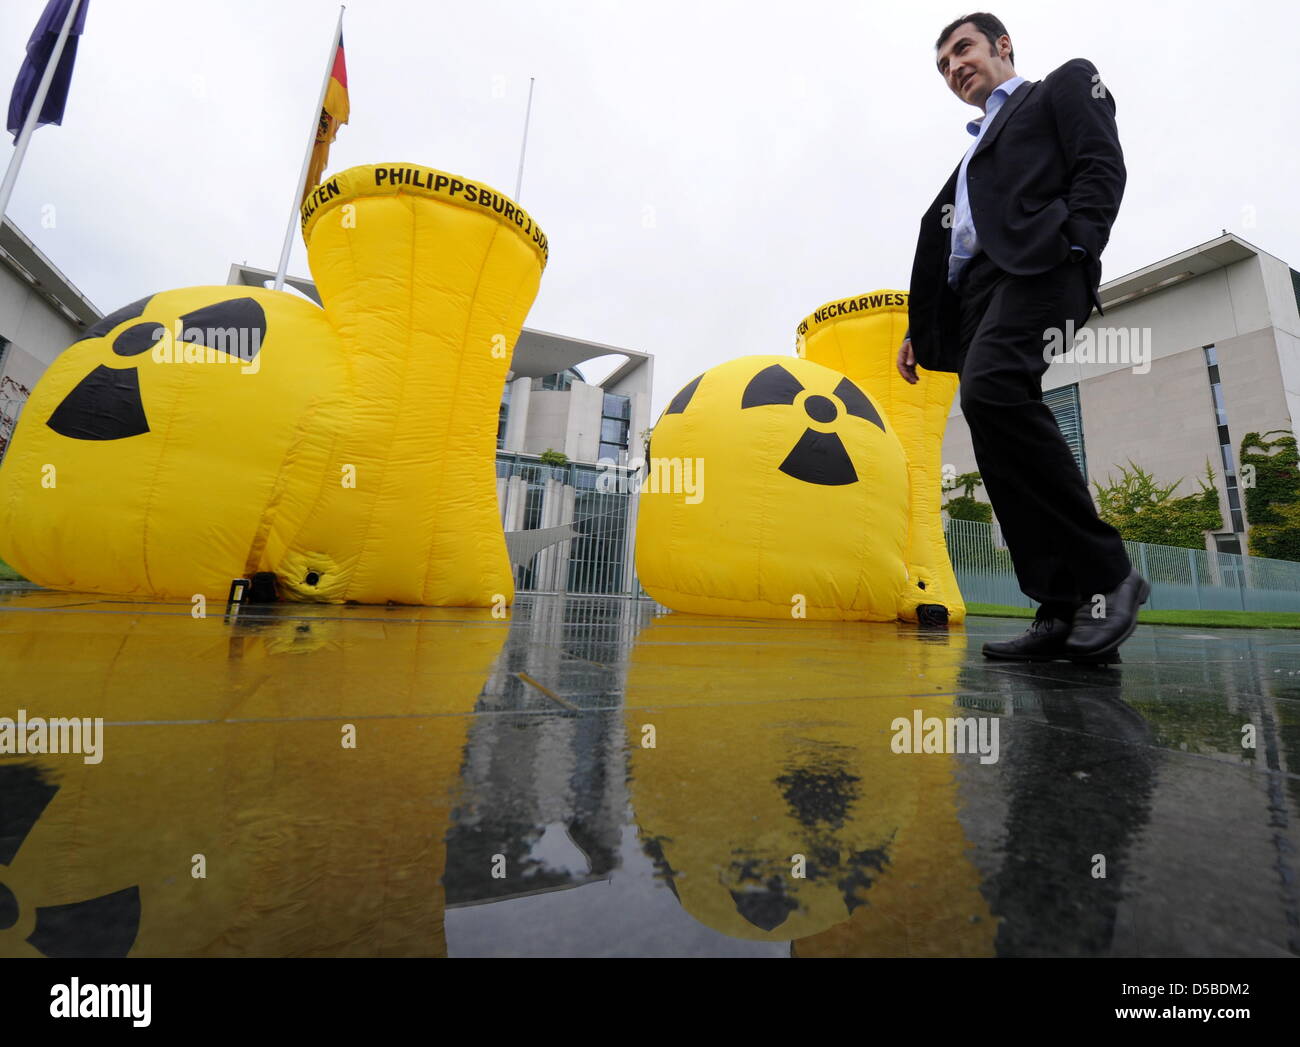 Greens chairman Cem Oezdemir is about two deflate two rubber nuclear plants in front of the German Chancellery after stating his views on nuclear policy with head of the parliamentary fraction Renate Kuenast in Berlin, Germany, 27 August 2010. Photo: TIM BRAKEMEIER Stock Photo